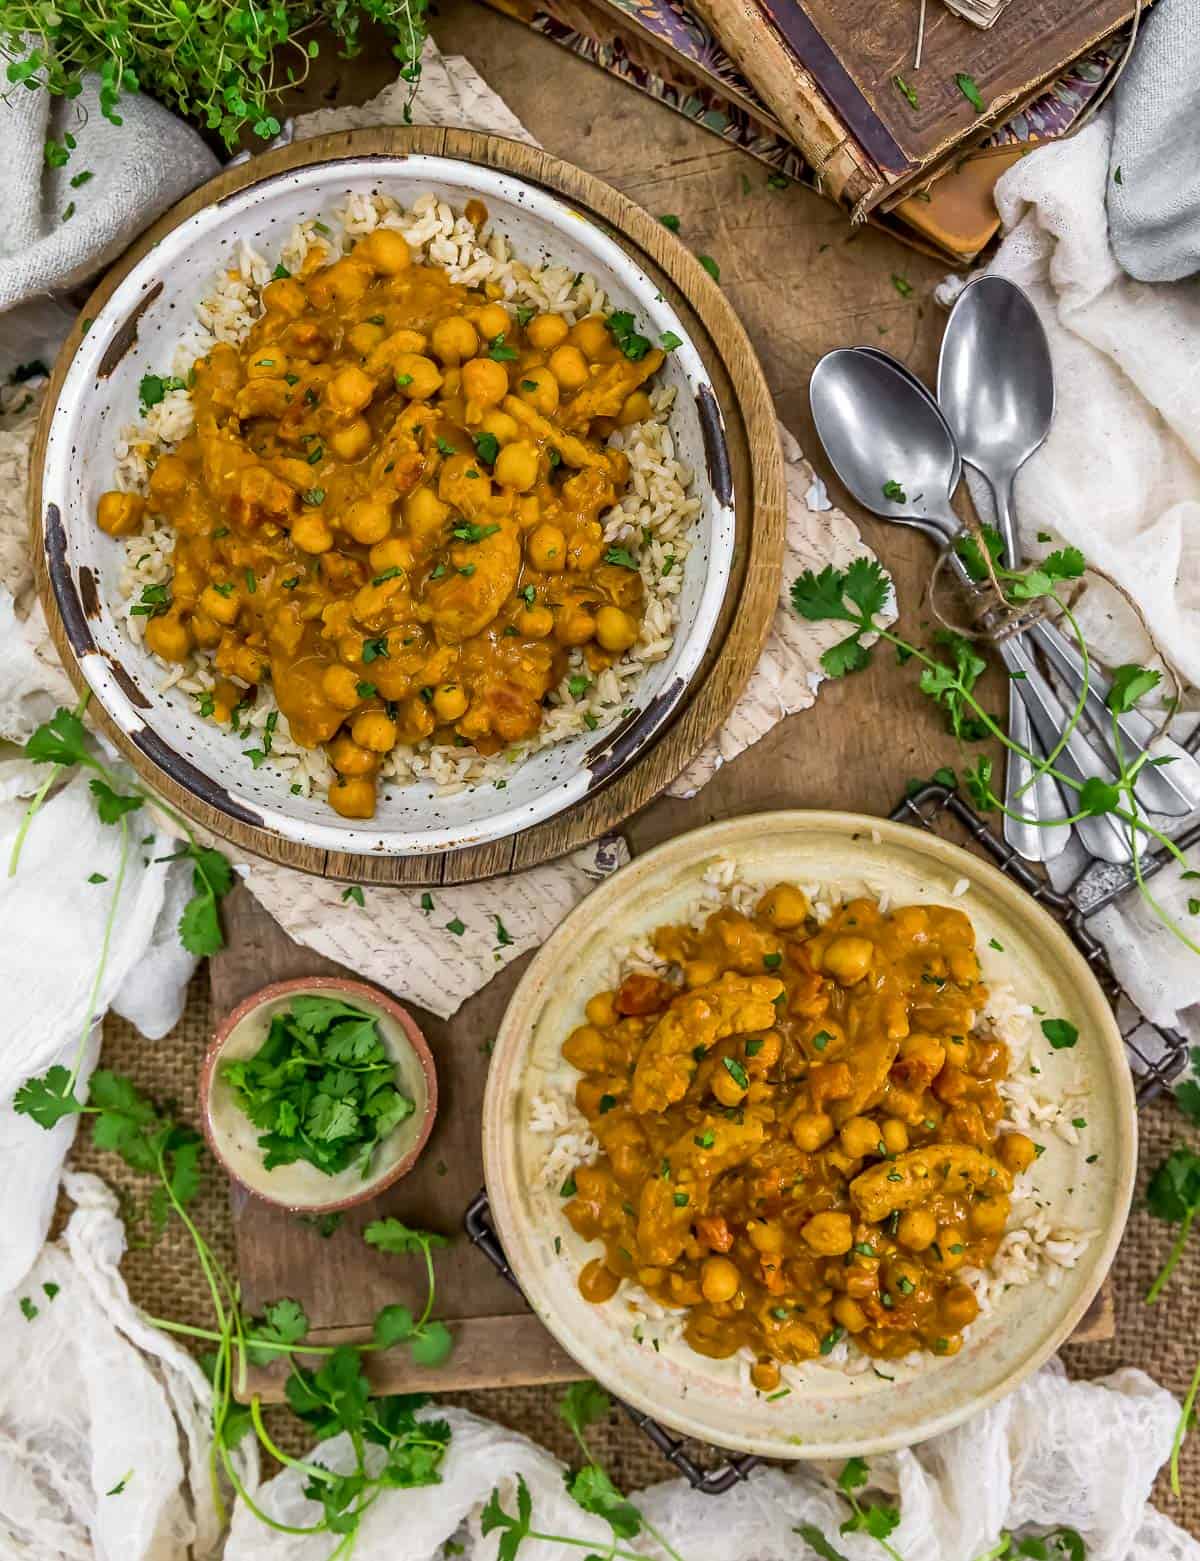 Tablescape of Easy Vegan Indian “Butter” Chickpeas